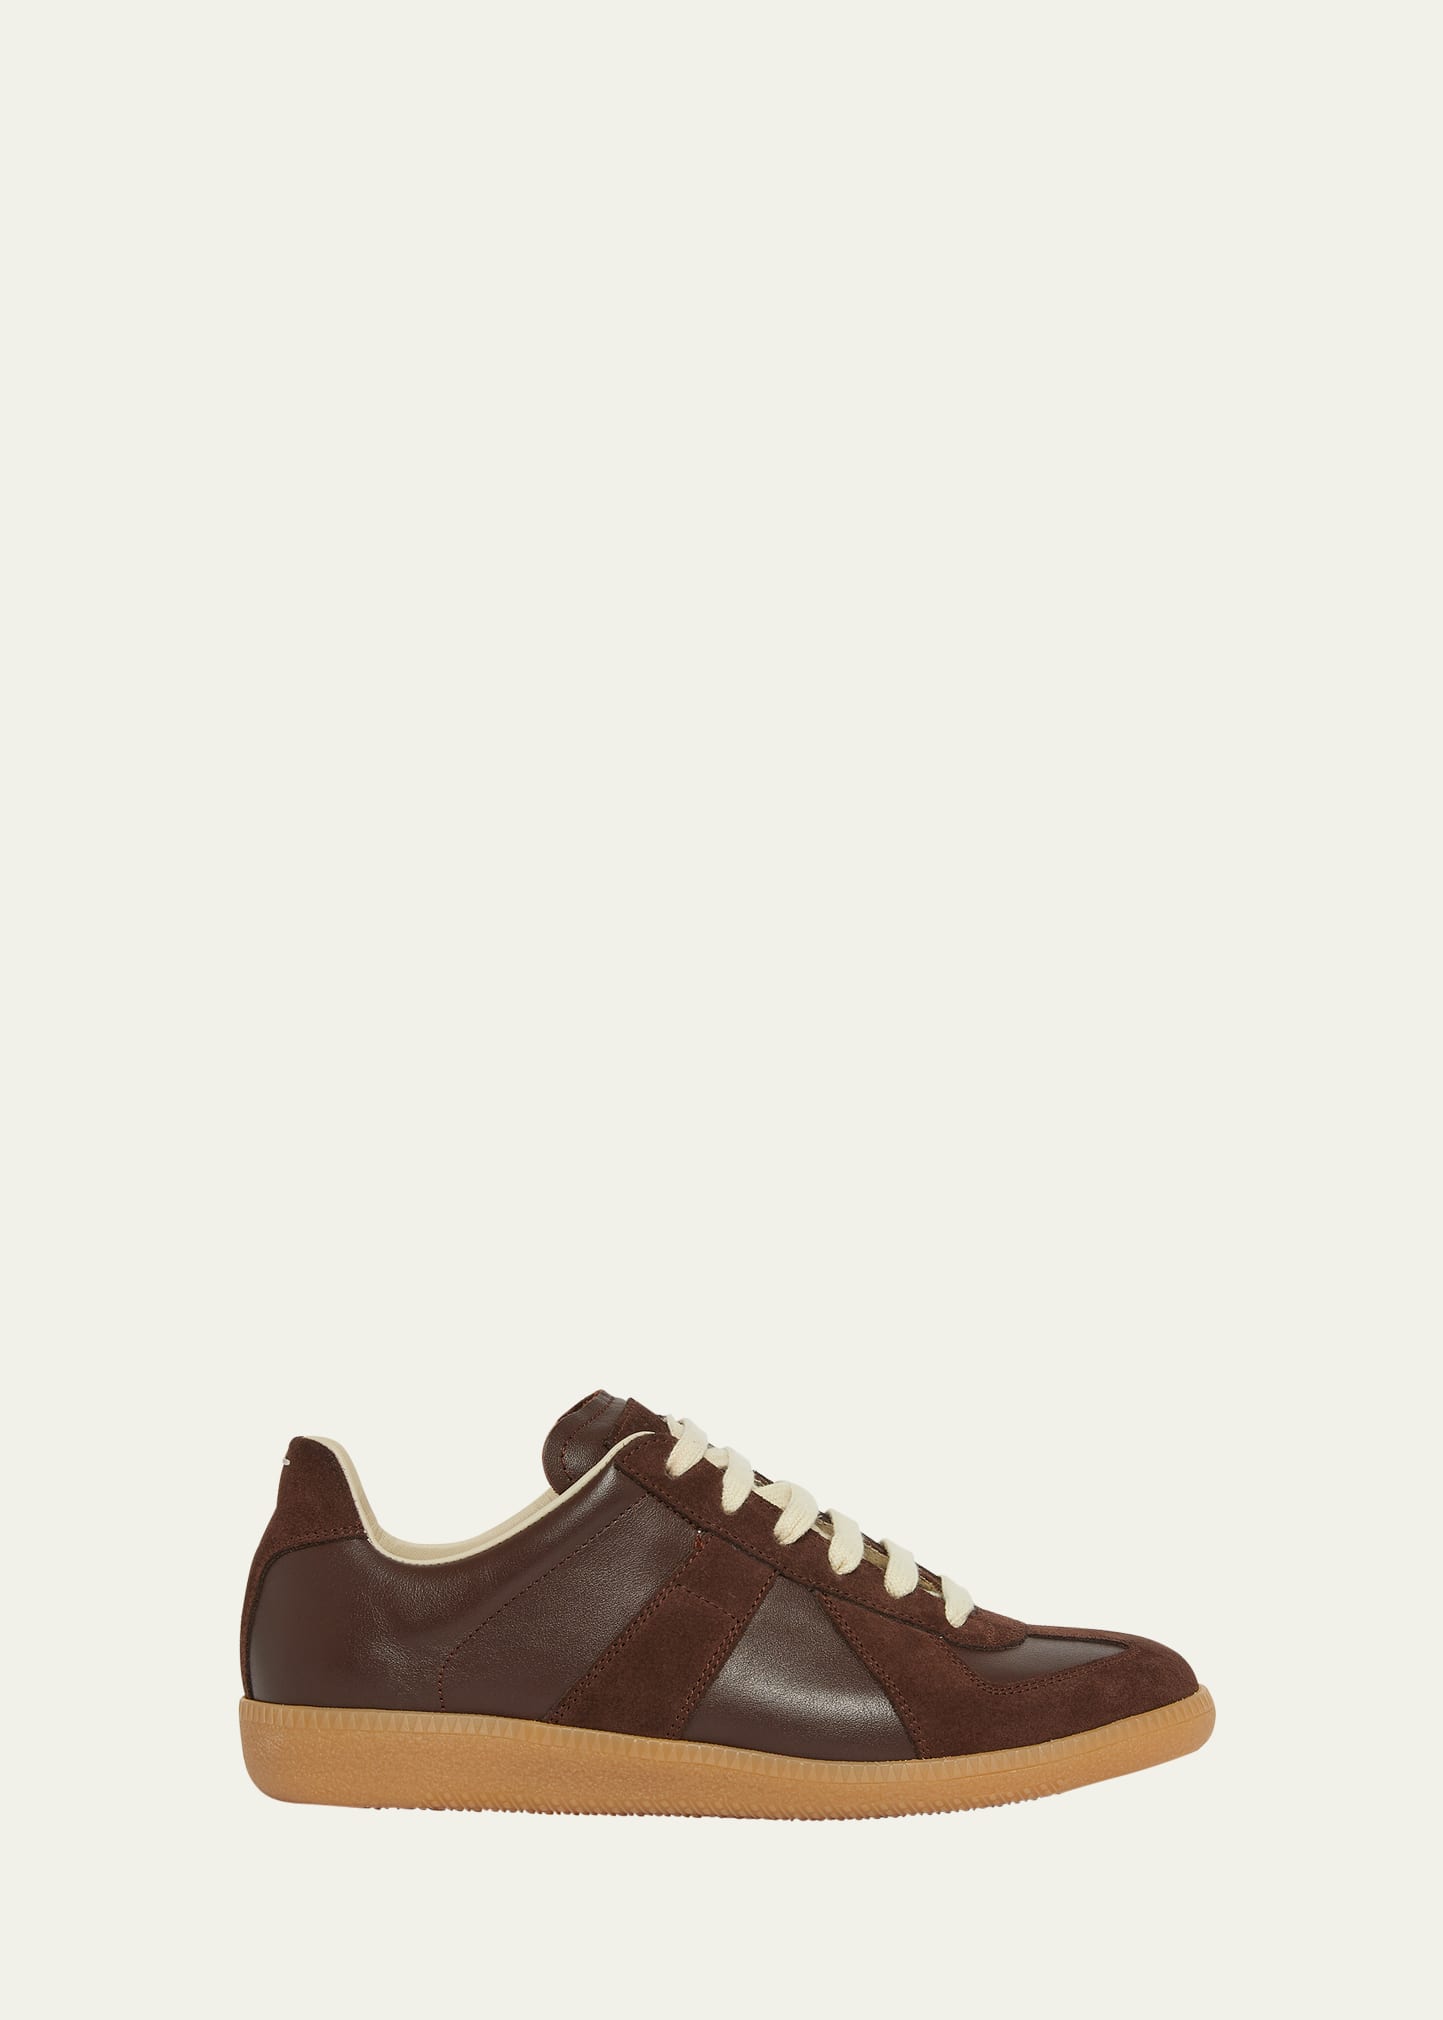 Maison Margiela Replica Suede & Leather Sneakers In Chic Brown